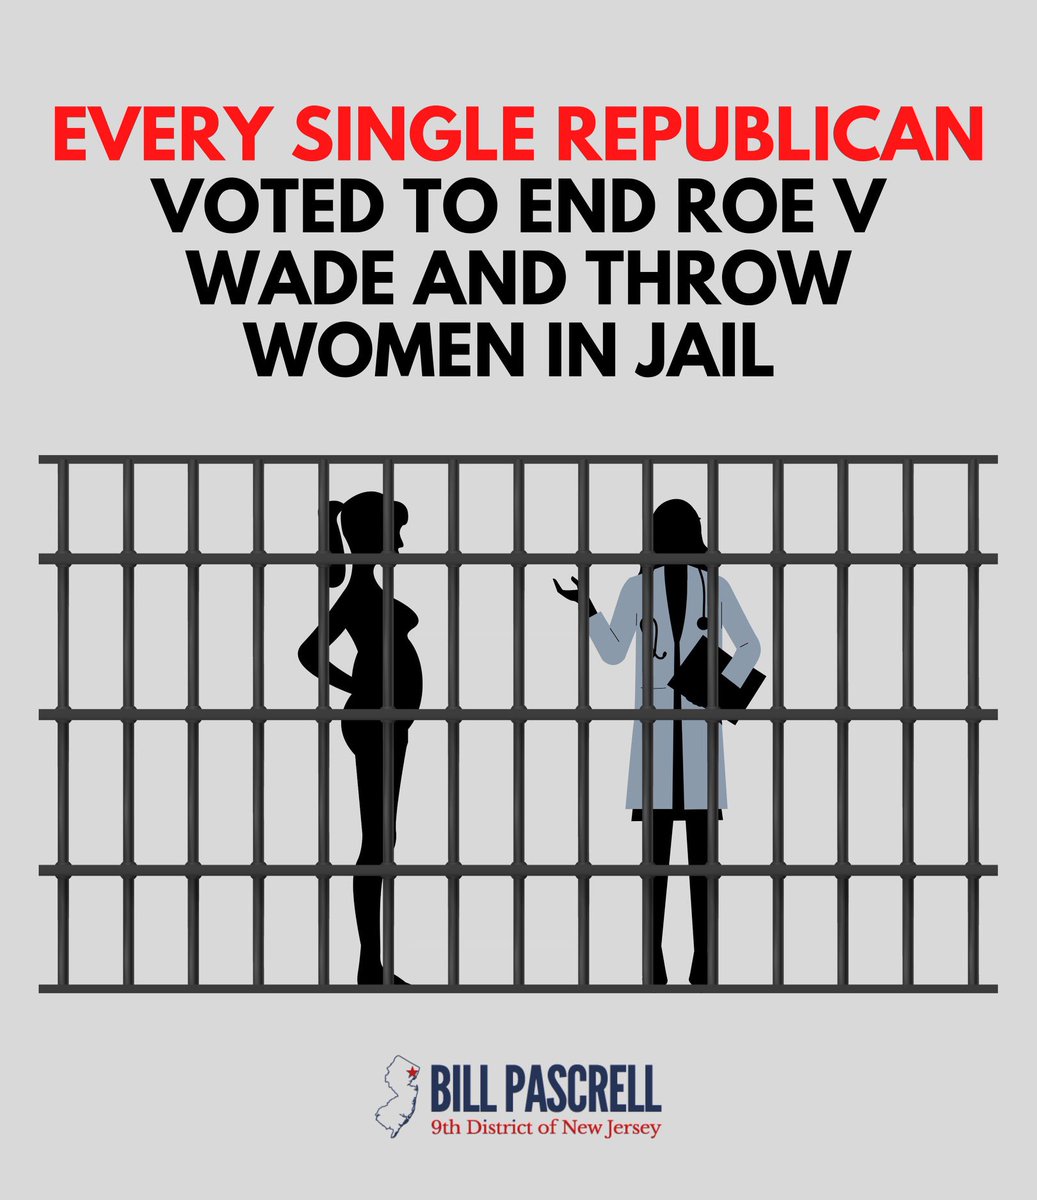 Reminder that when Democrats acted to save Roe v. Wade every single republican in Congress voted no and voted to throw women and doctors in jail.